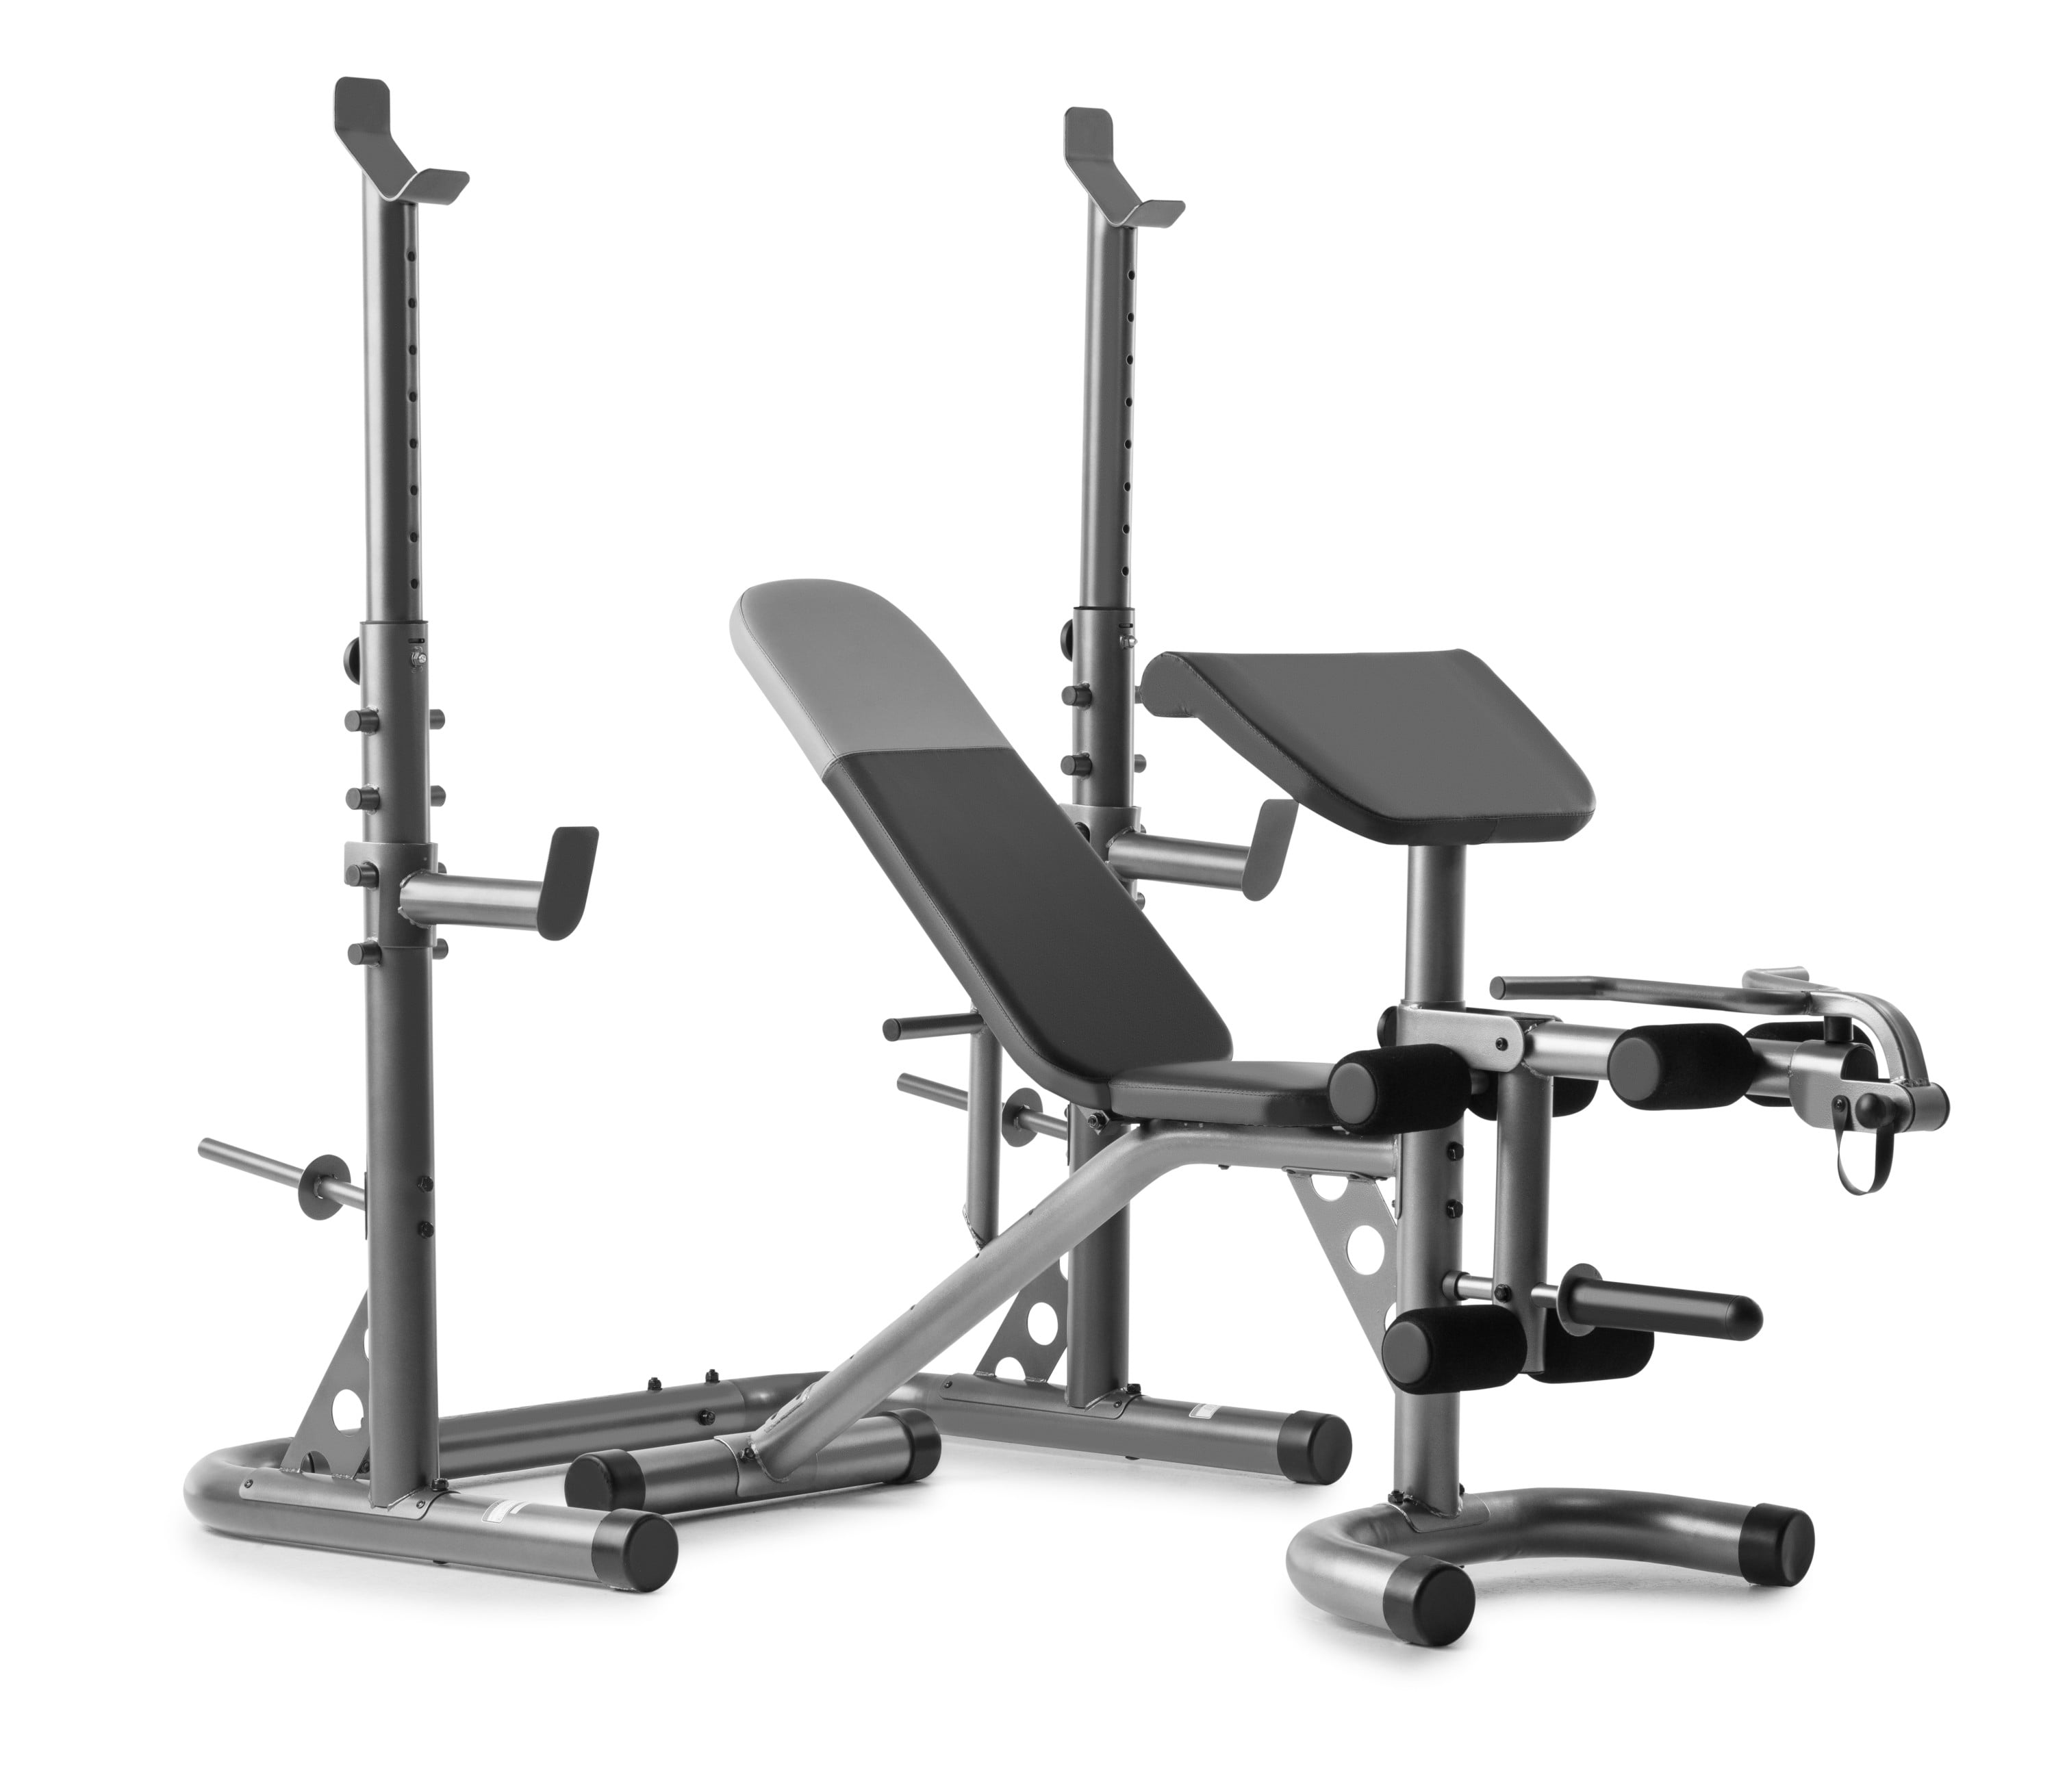 Gold's Gym XRS 20 Olympic Utility Bench Weight Home Gym Total Body Workout Set 